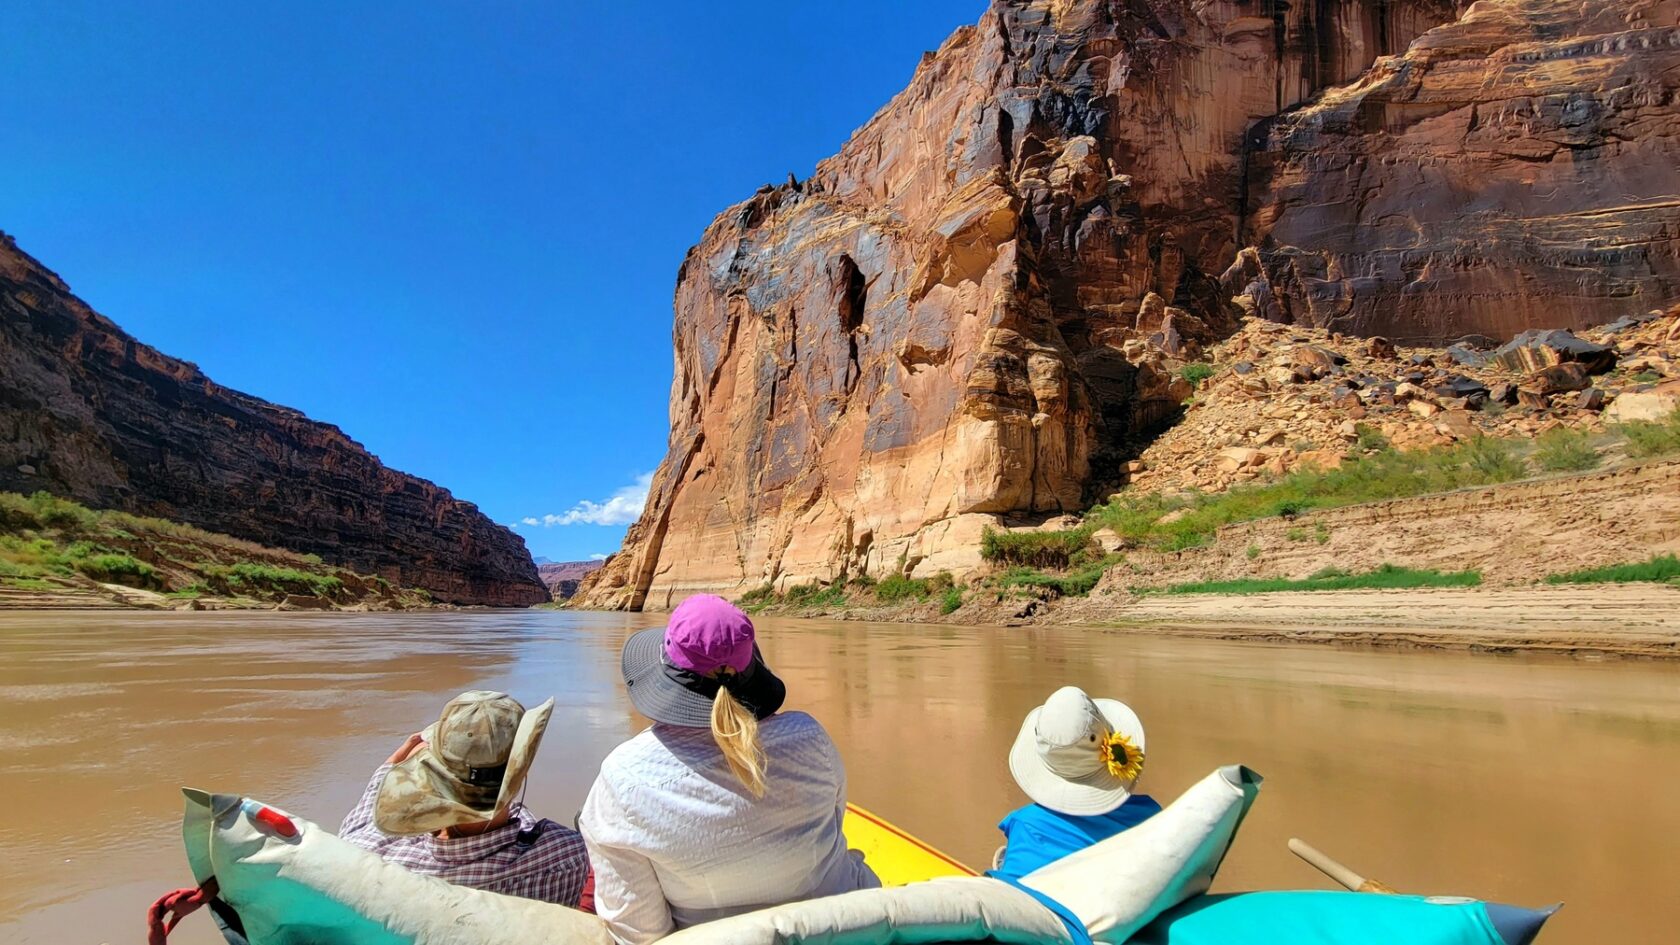 Rafters relaxing on a scenic stretch of the Colorado River